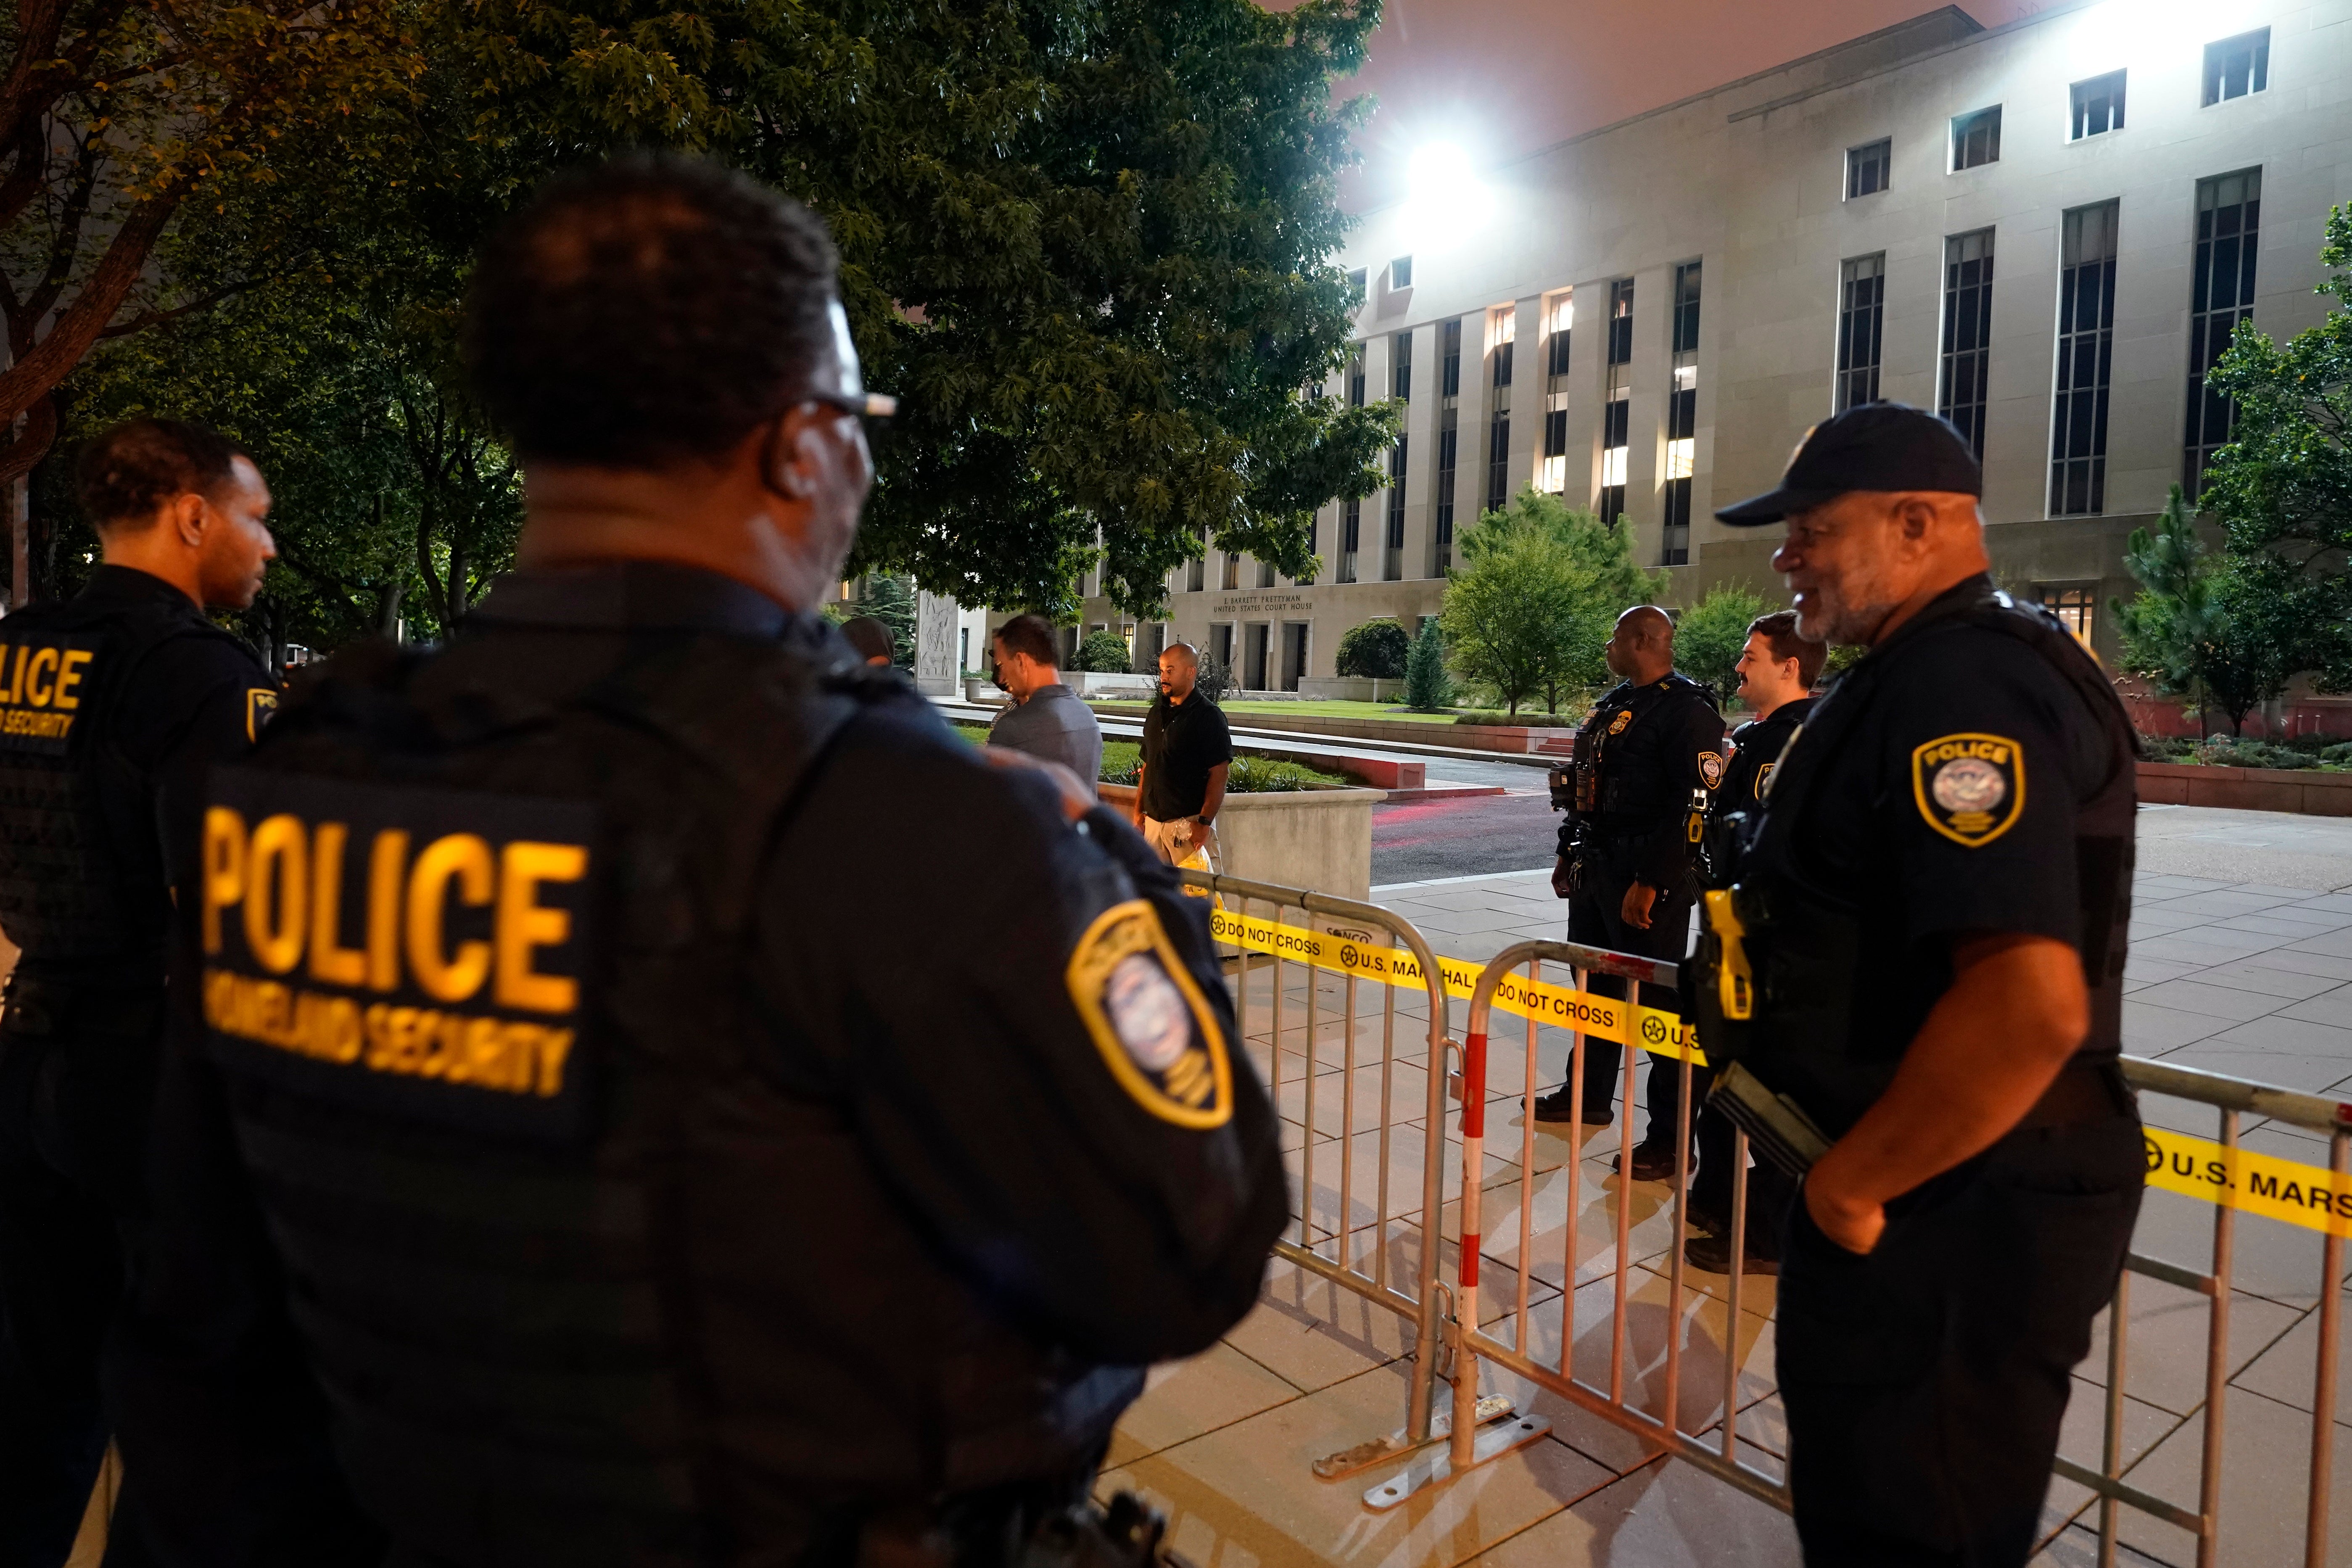 Security ramps up Wednesday night ahead of arraignment